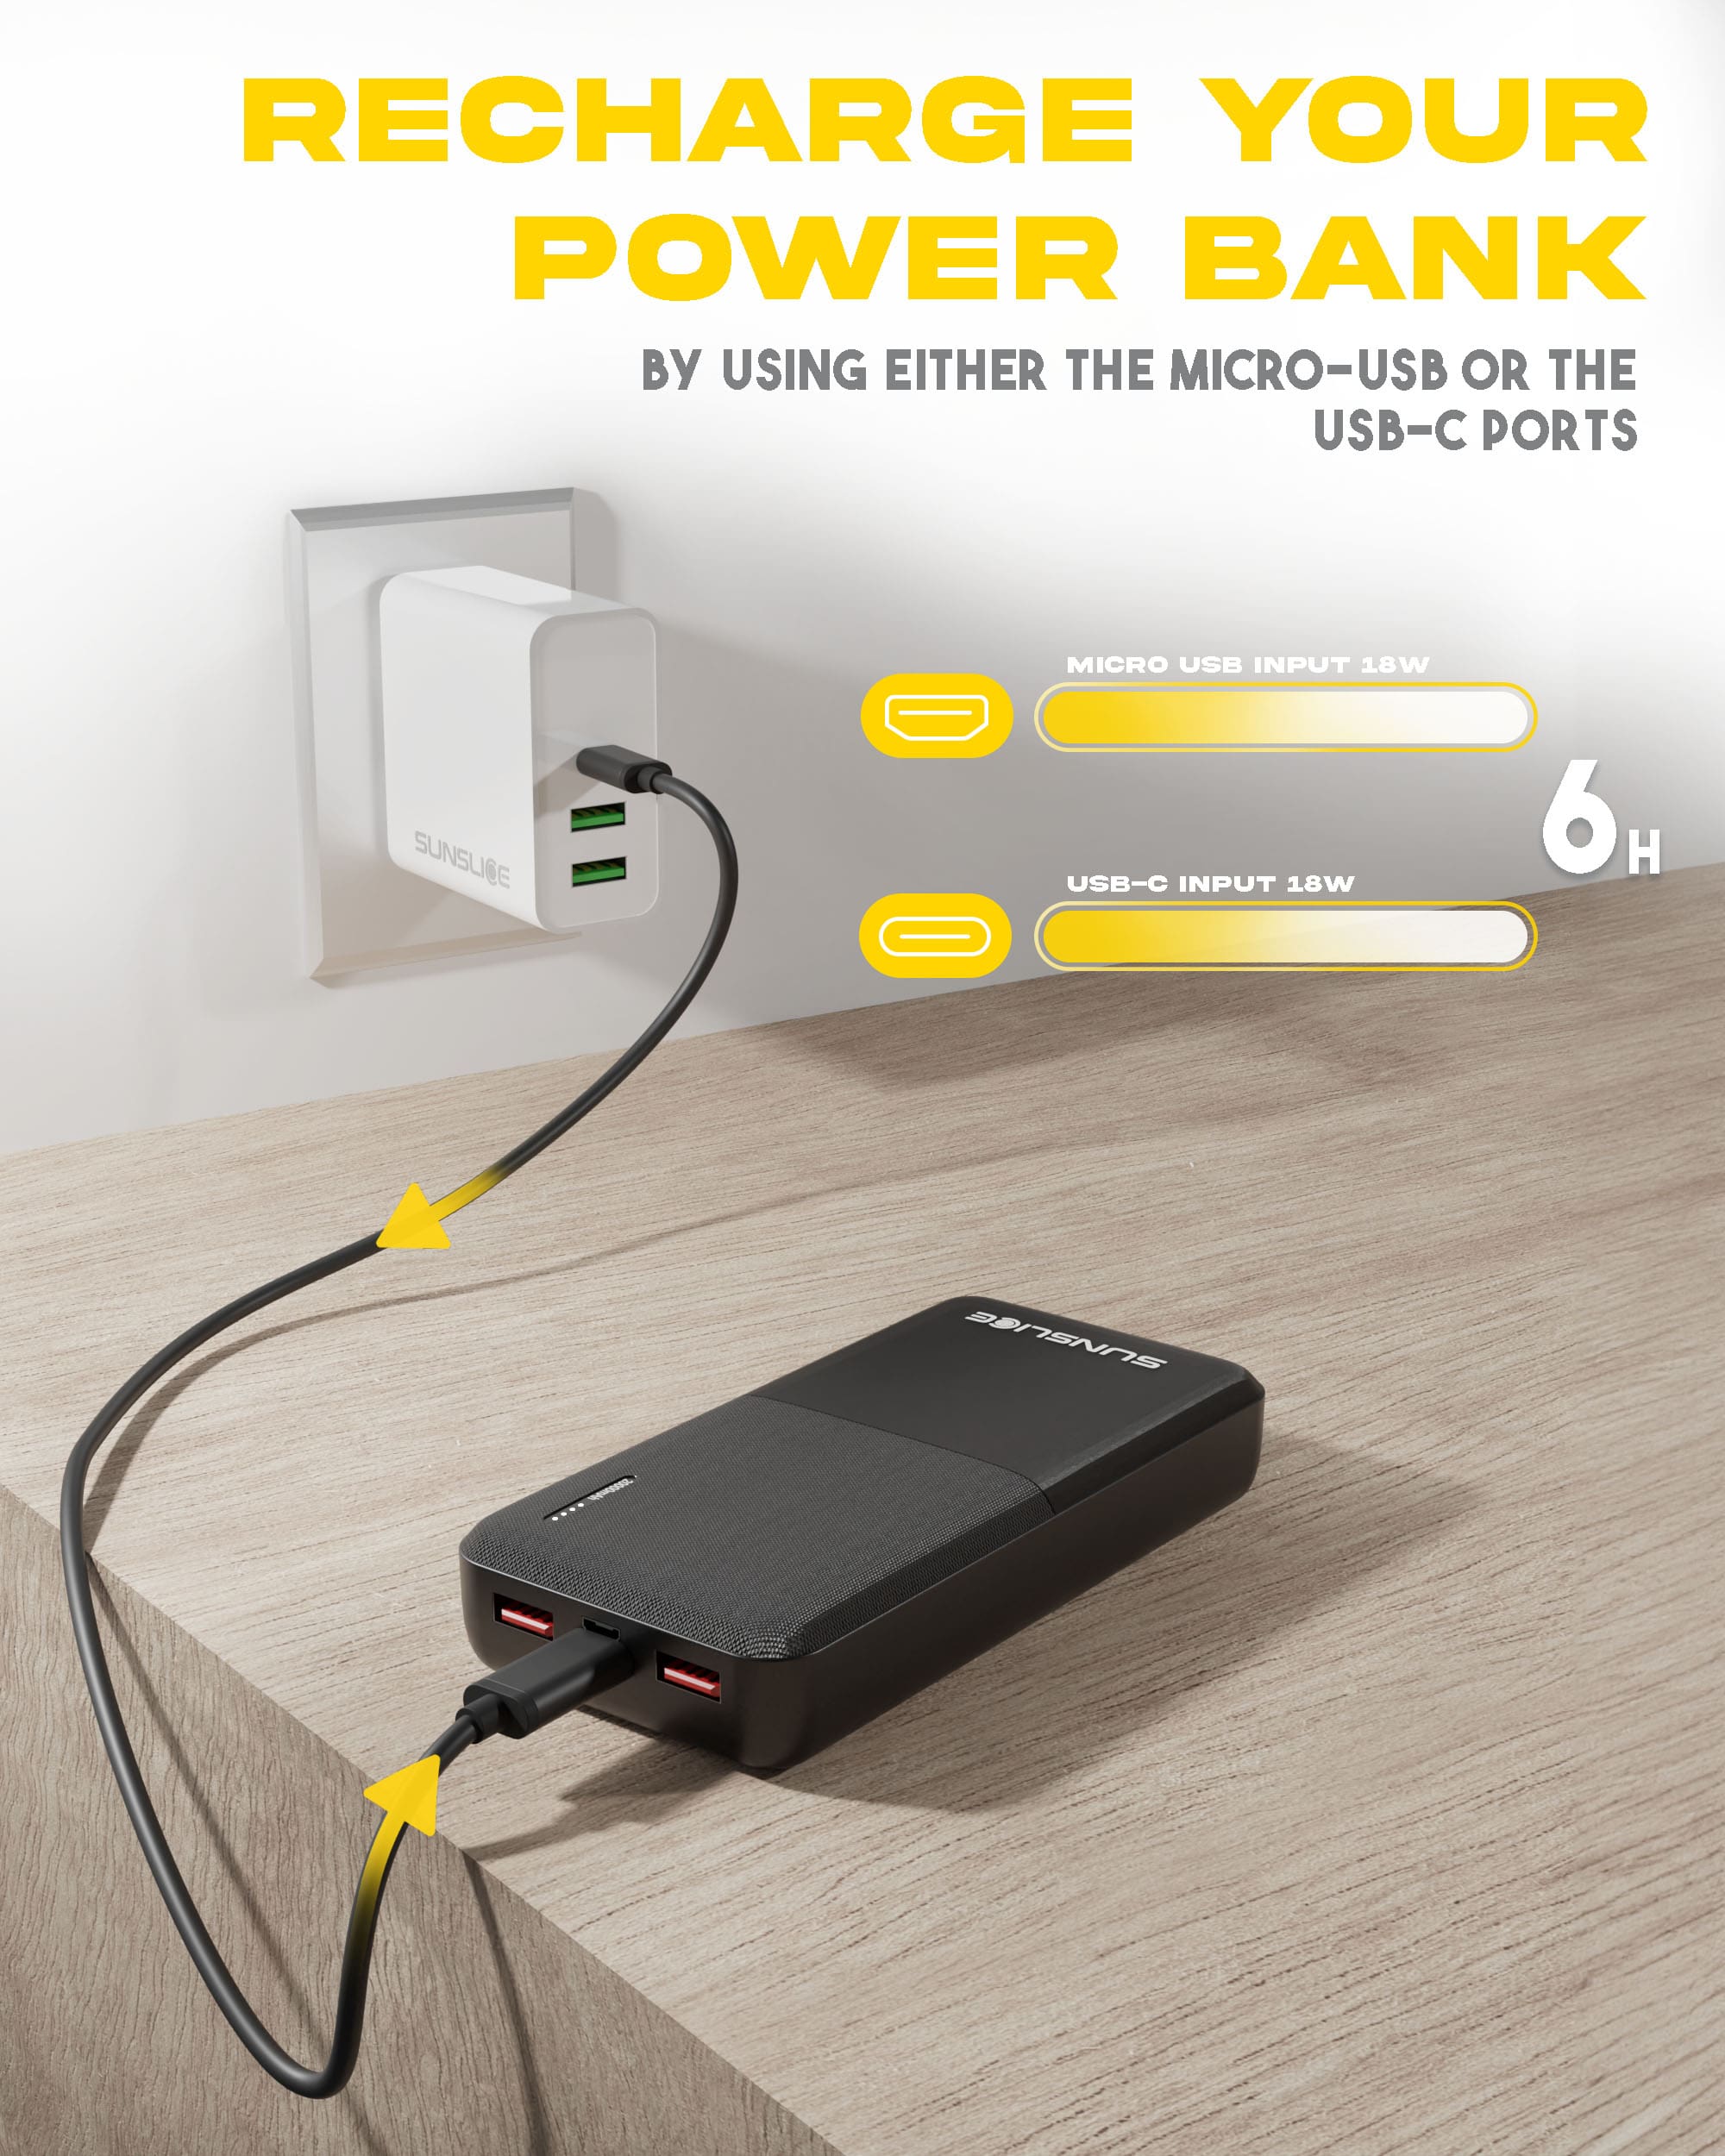 The gravity 20 power bank can be recharge by using either the micro-USB or the USB-C port